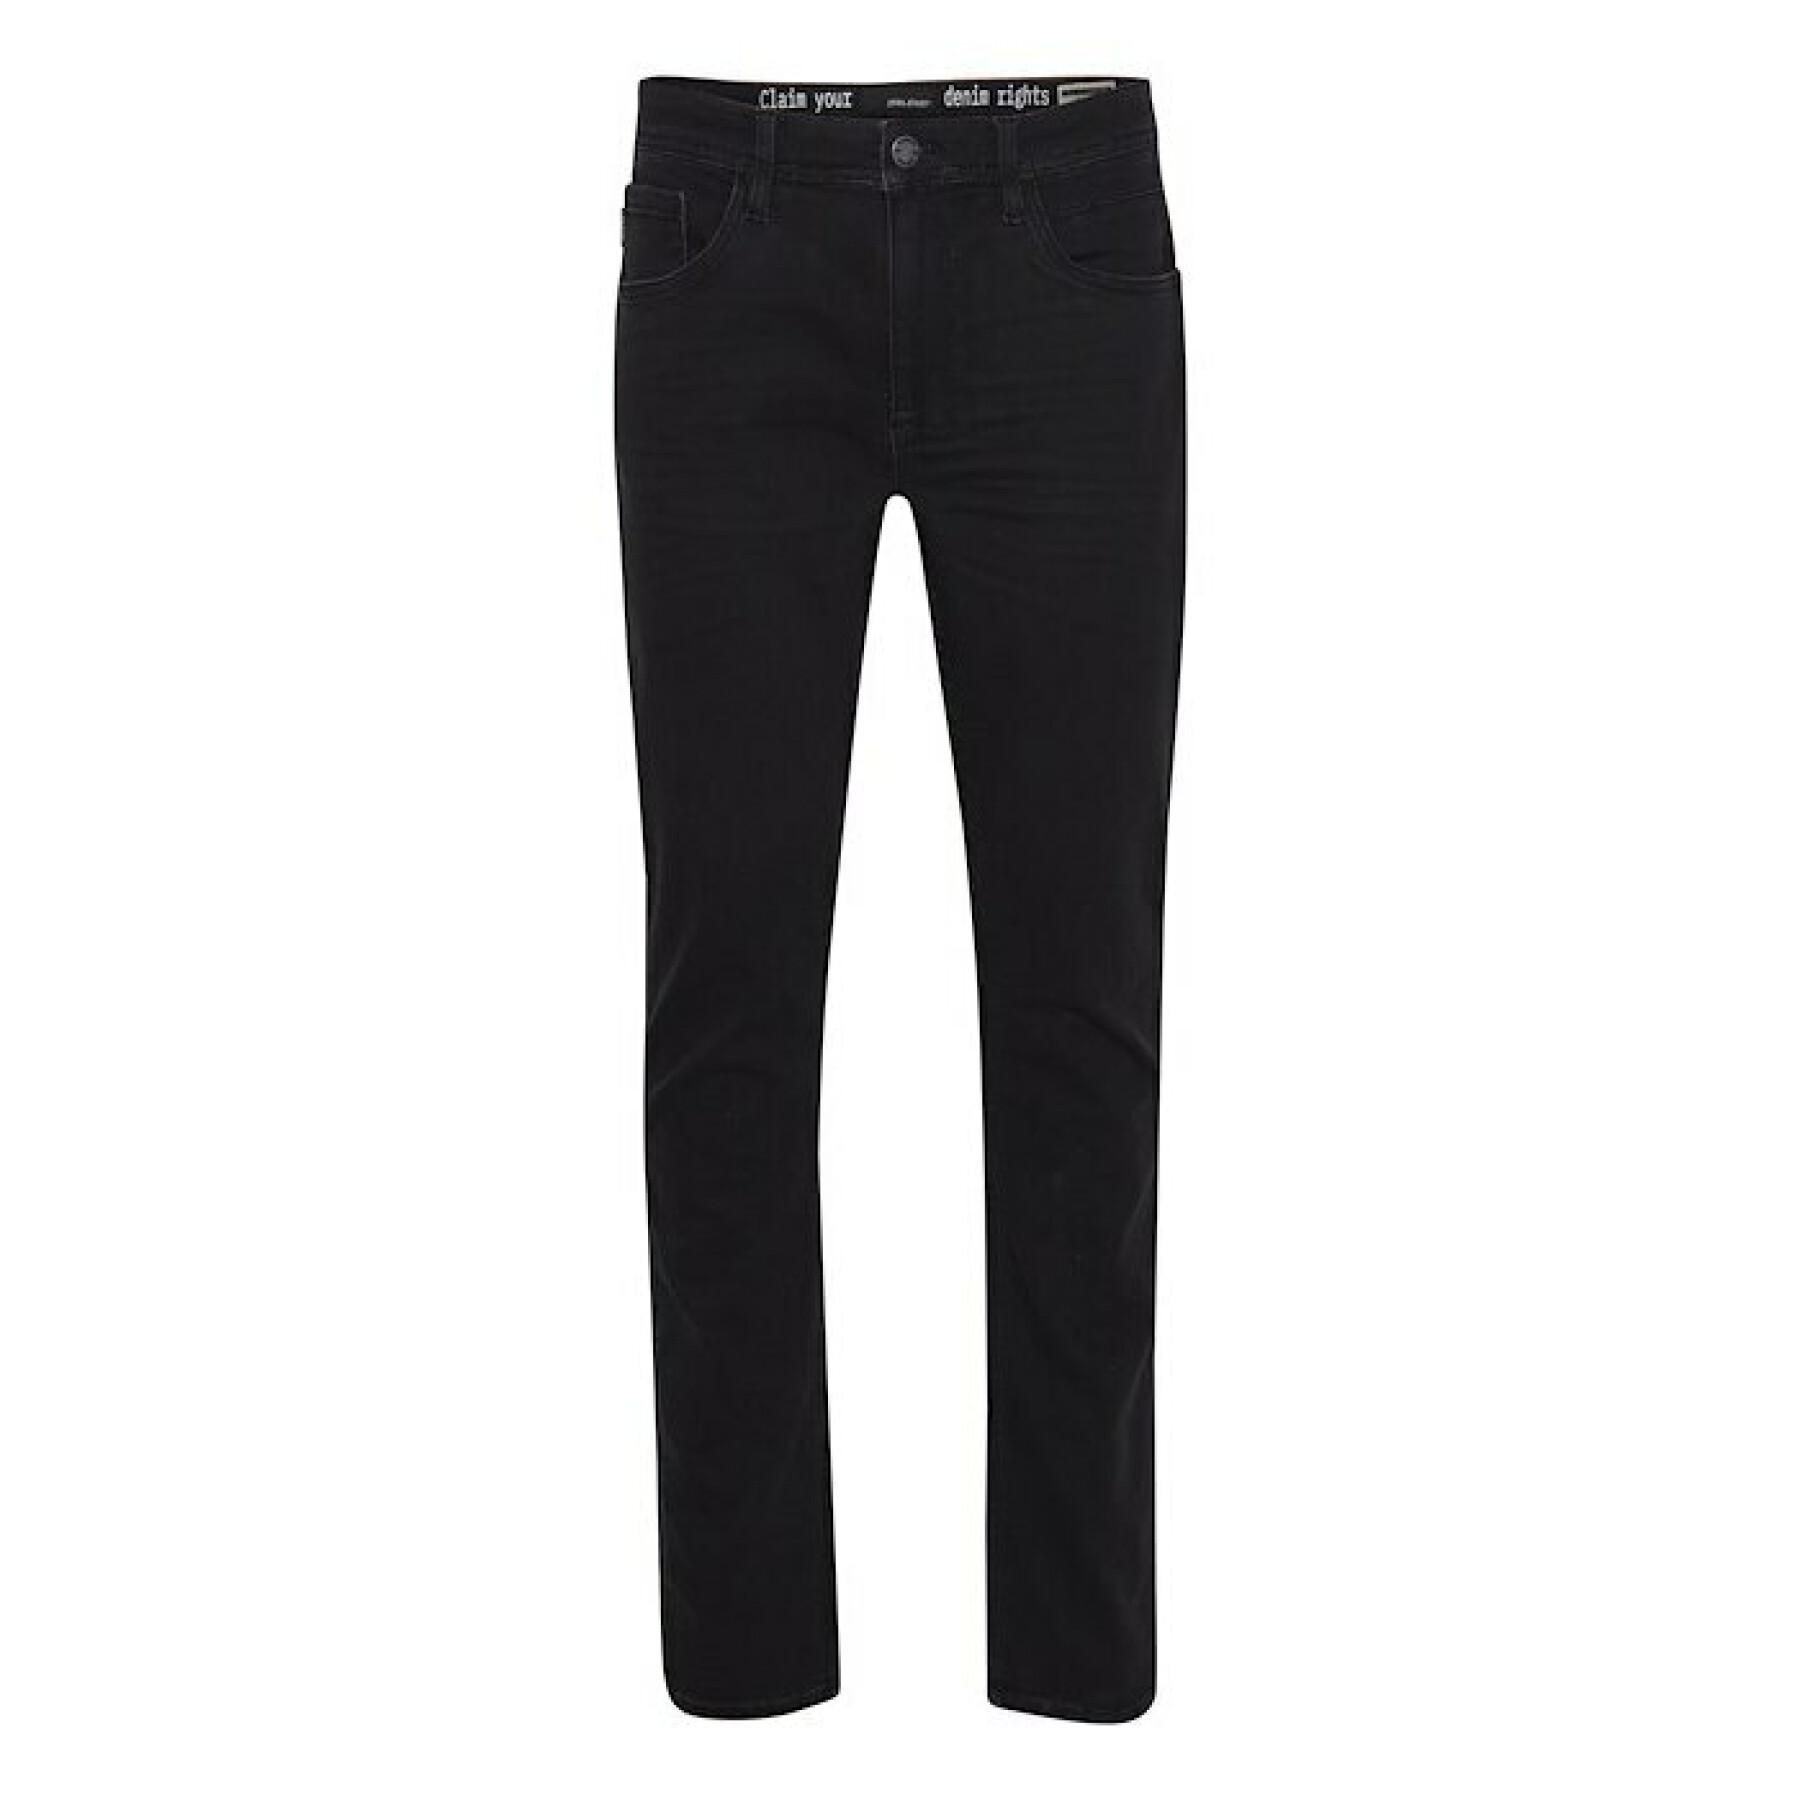 Women's tapered jeans Blend Twister - Jogg